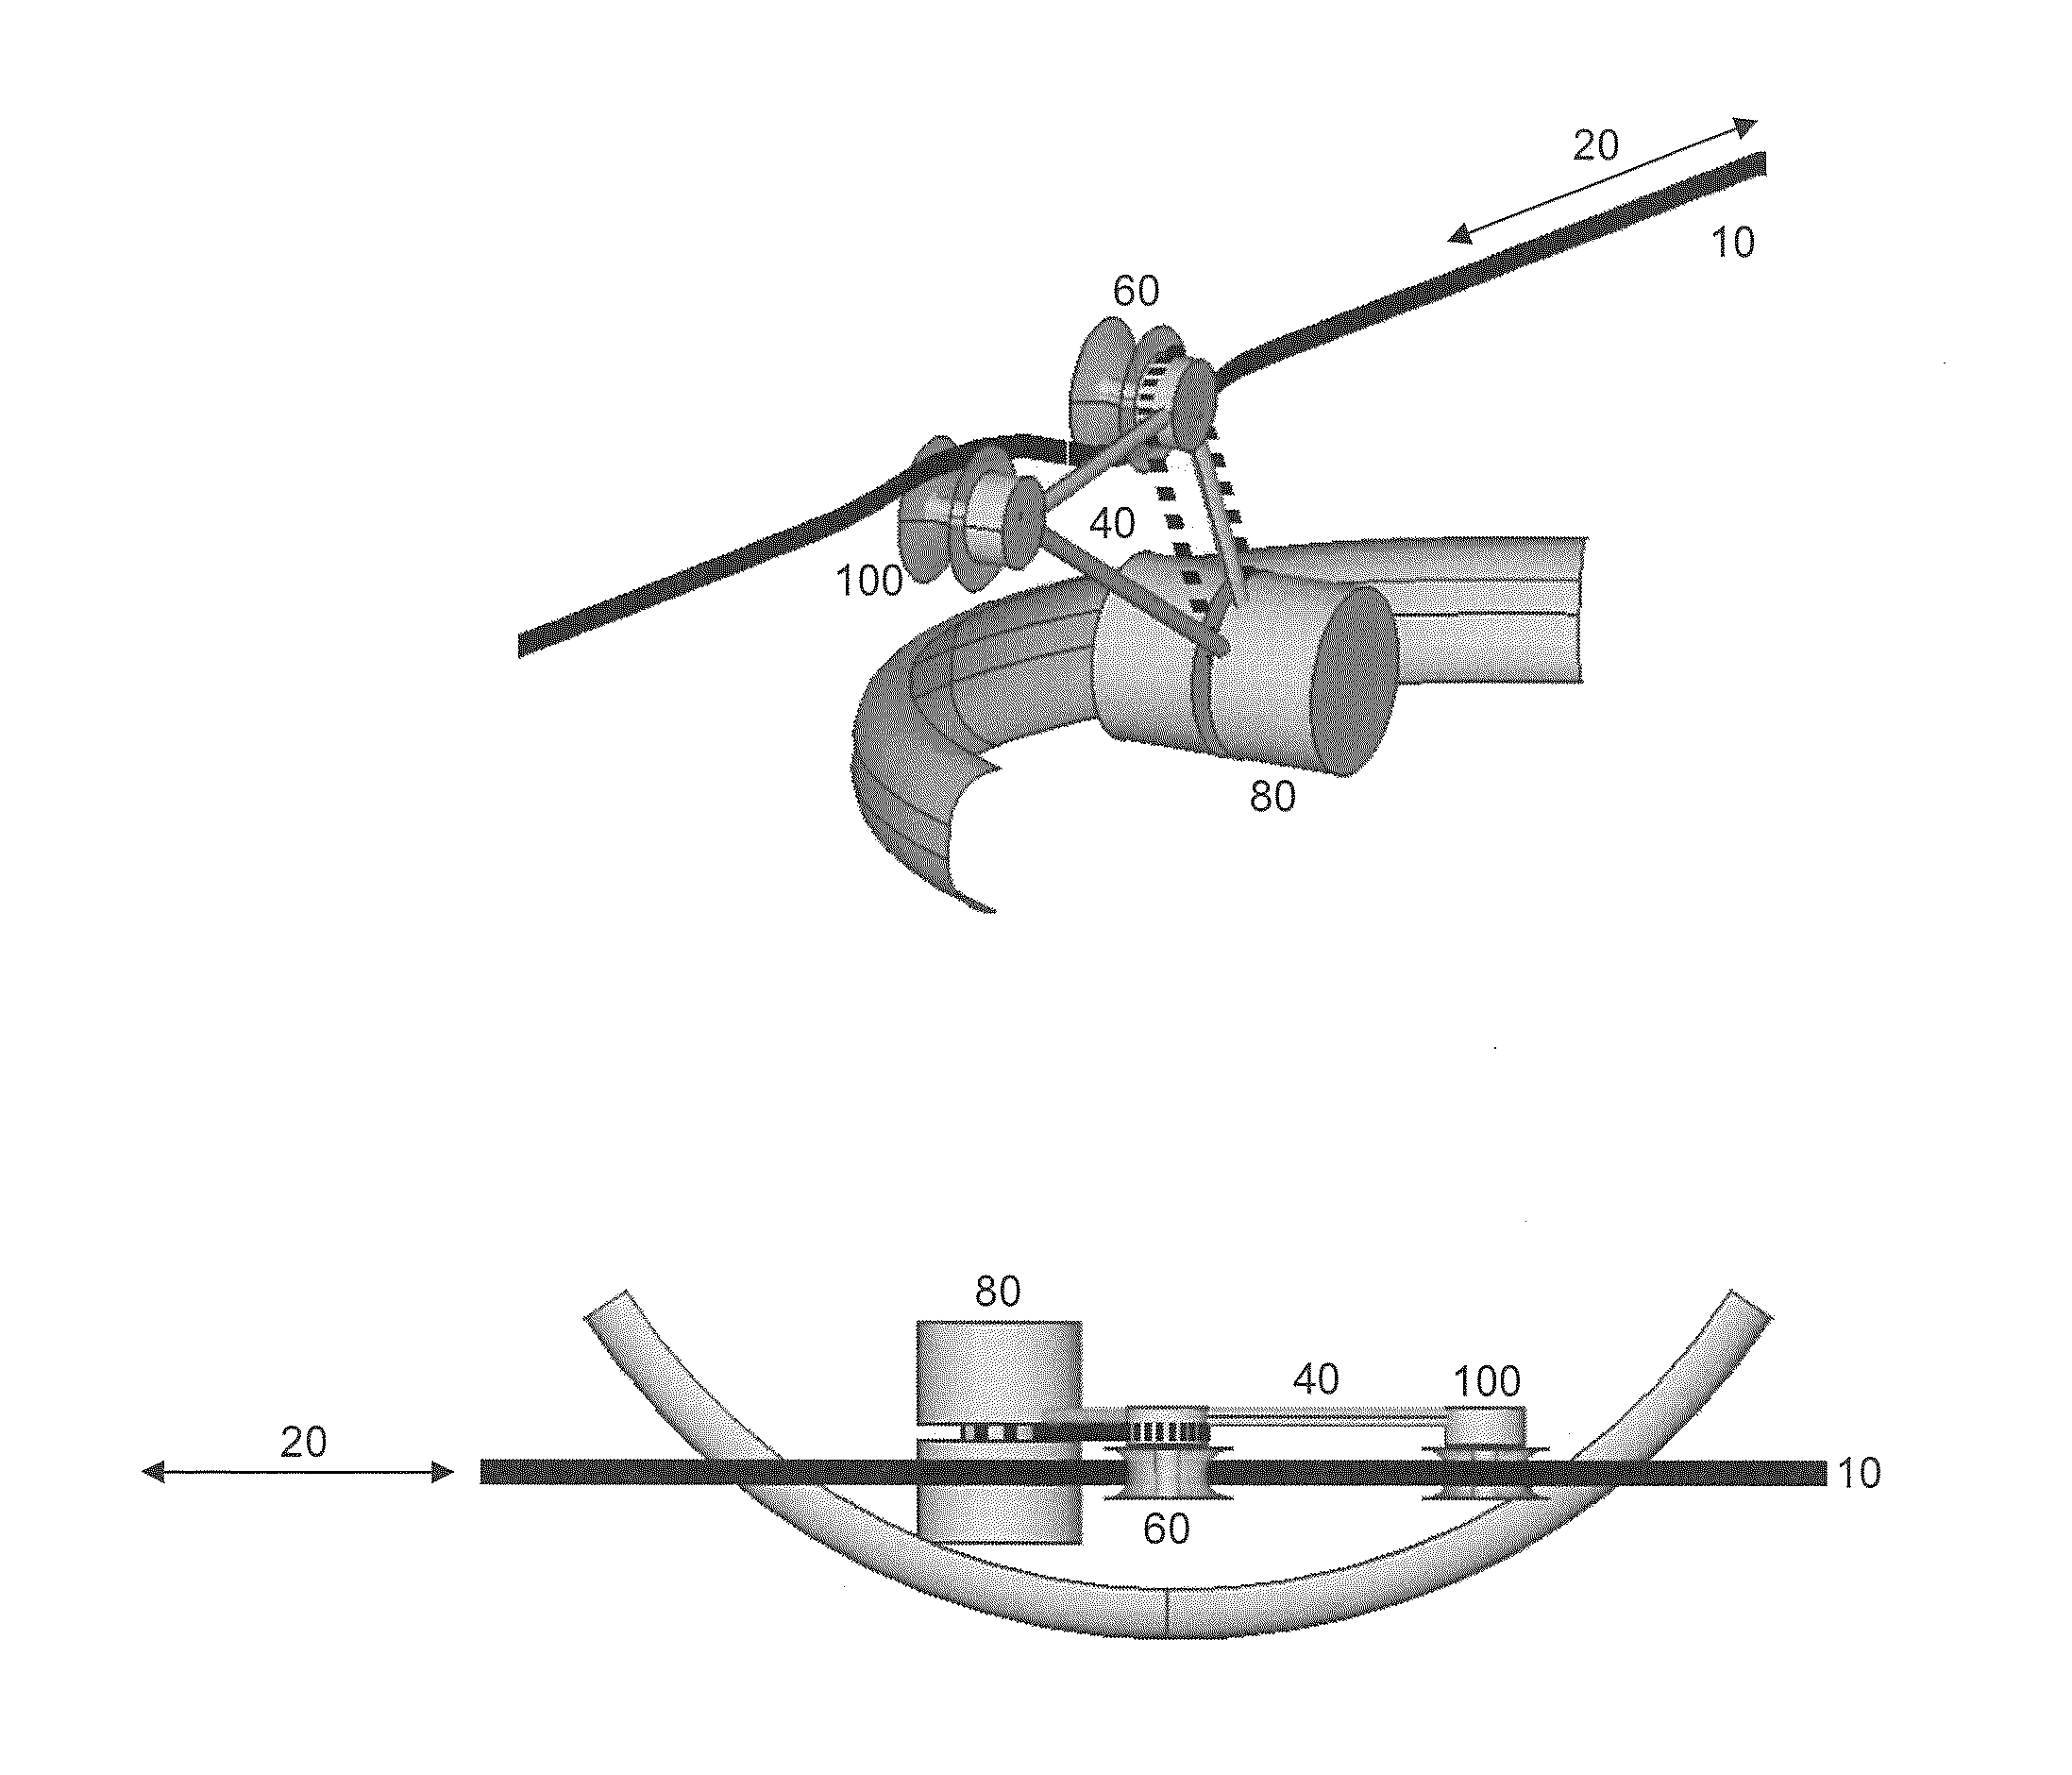 Apparatus and method for ice and frost removal from power lines